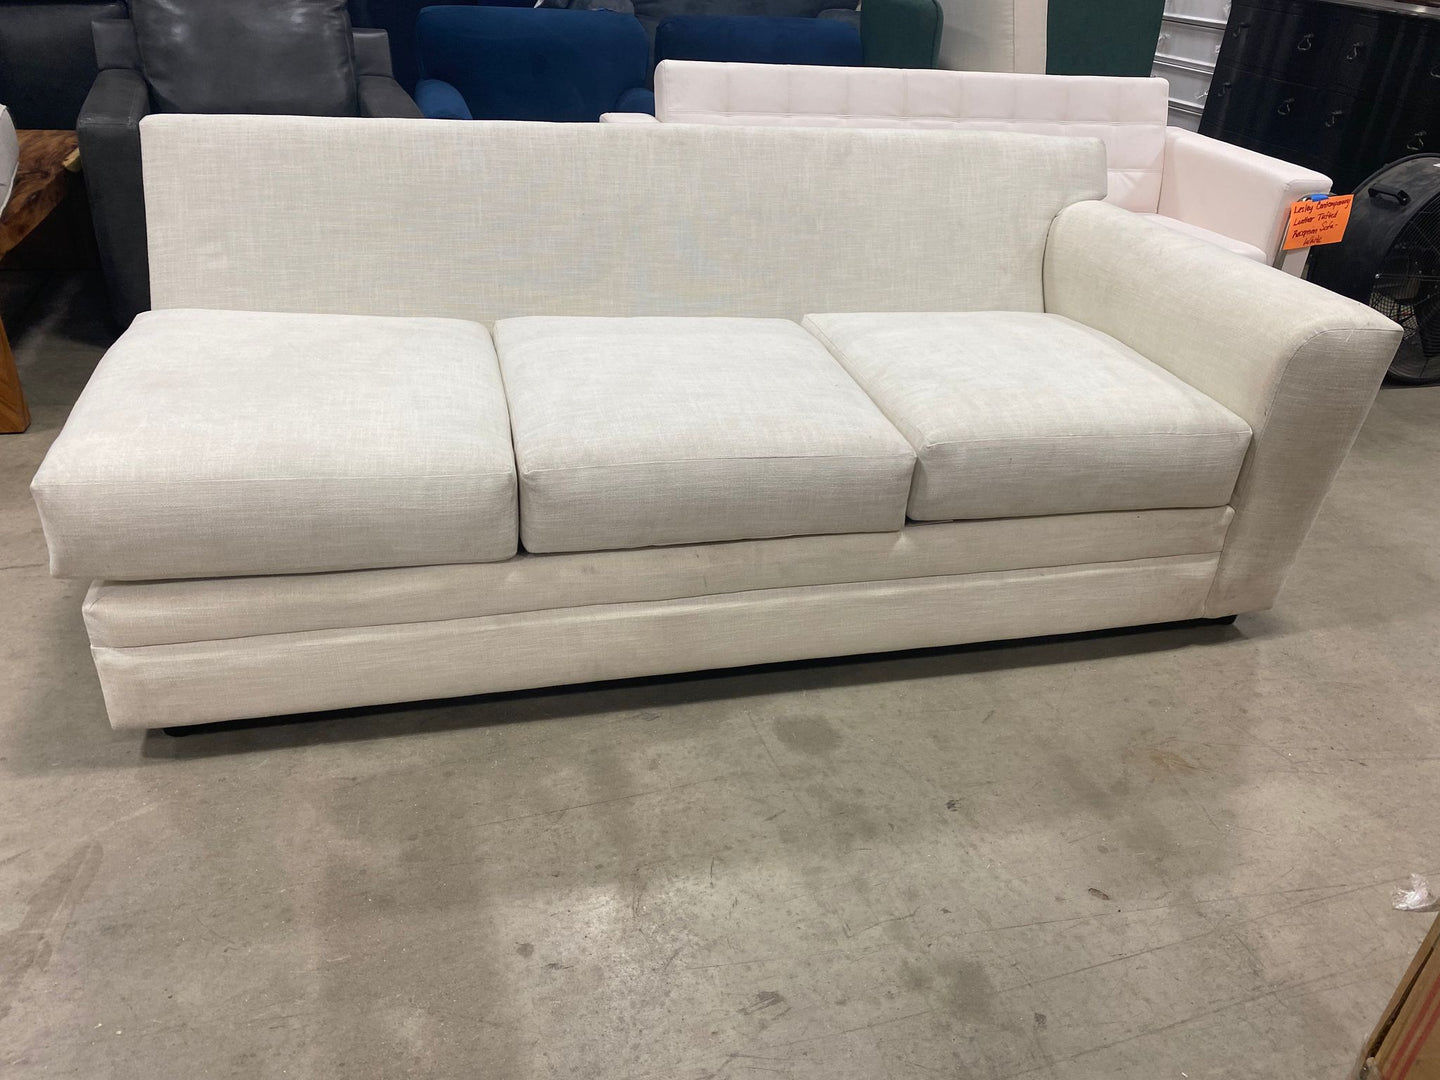 Ashburn Stationary Sectional Piece *AS-IS*